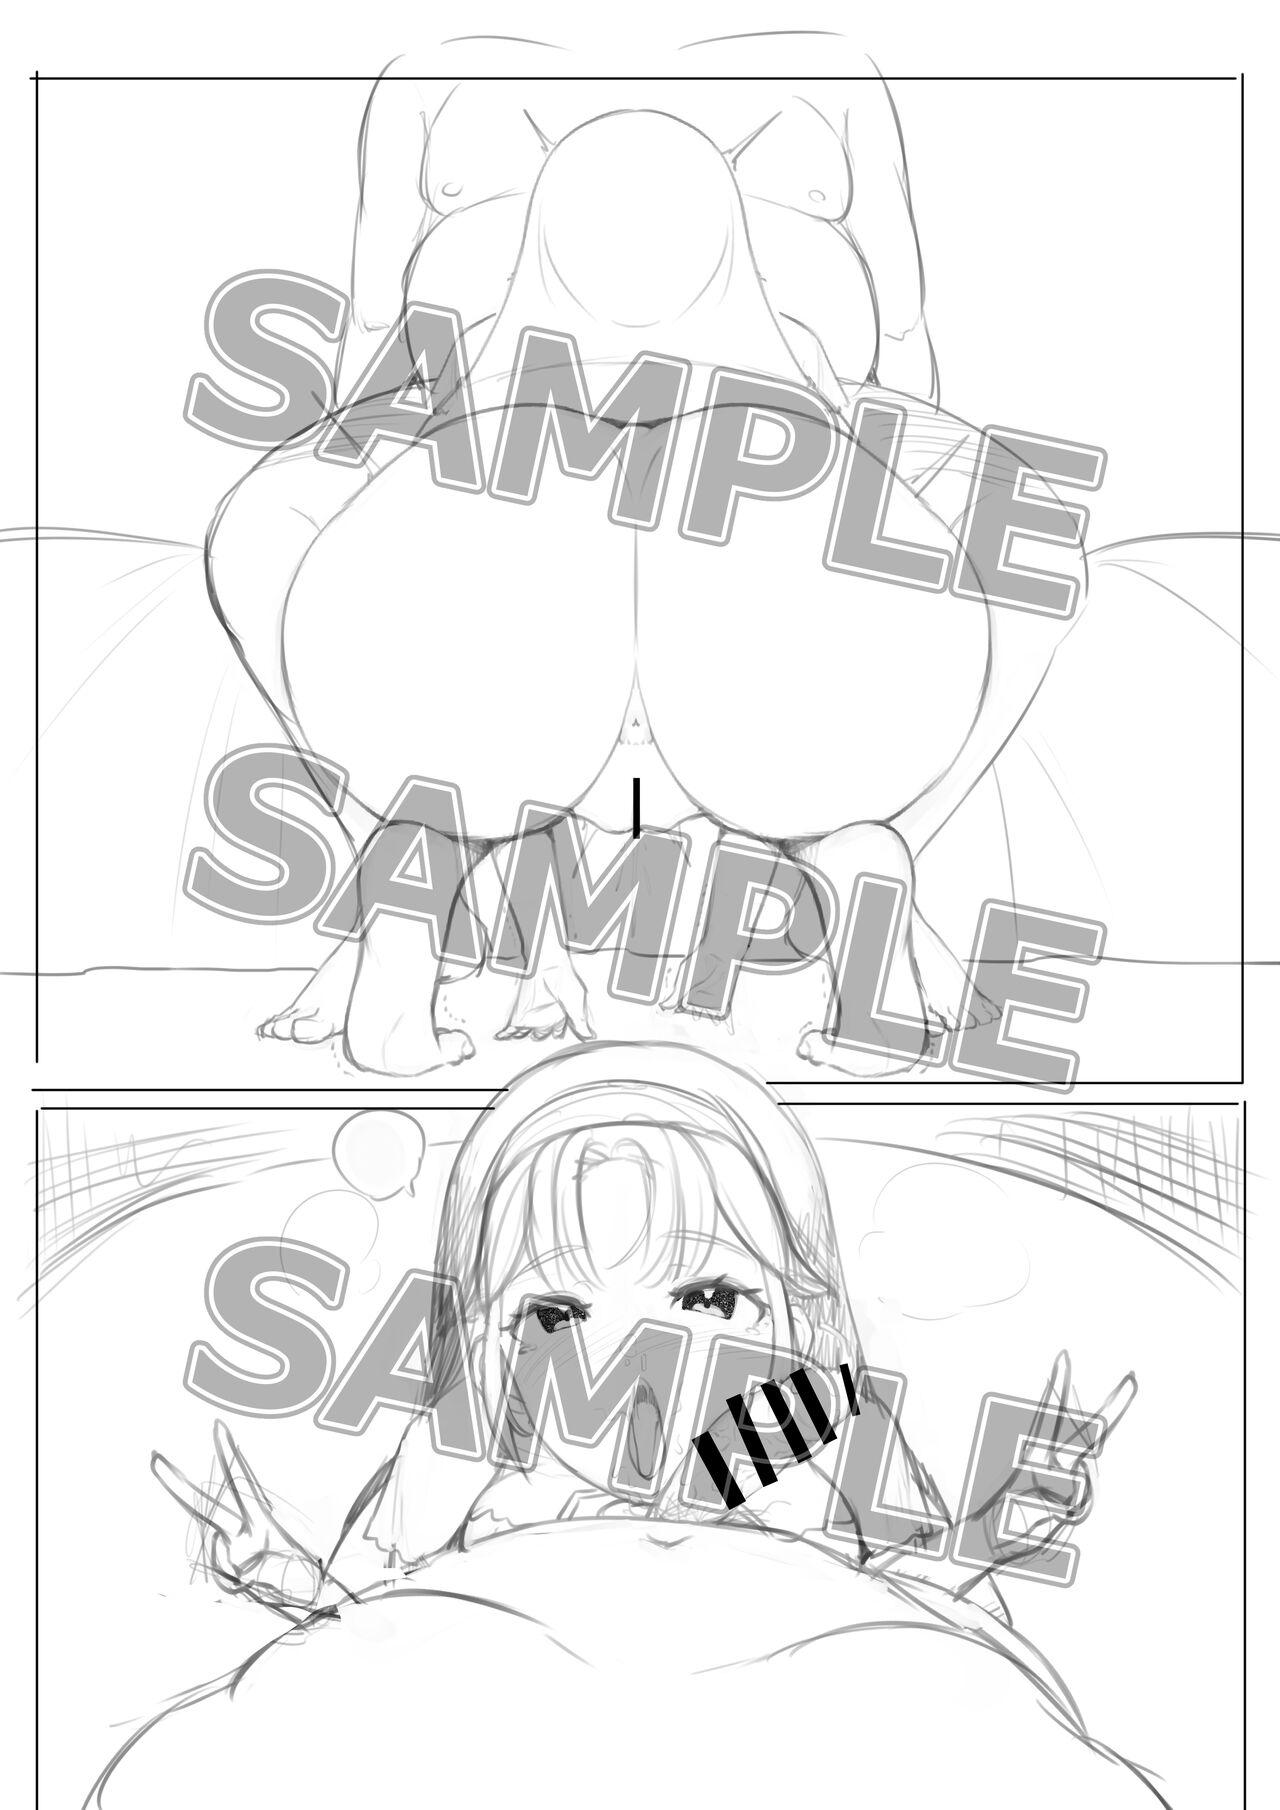 Francais Unfinished/In progress works - Nijisanji Funny - Page 22